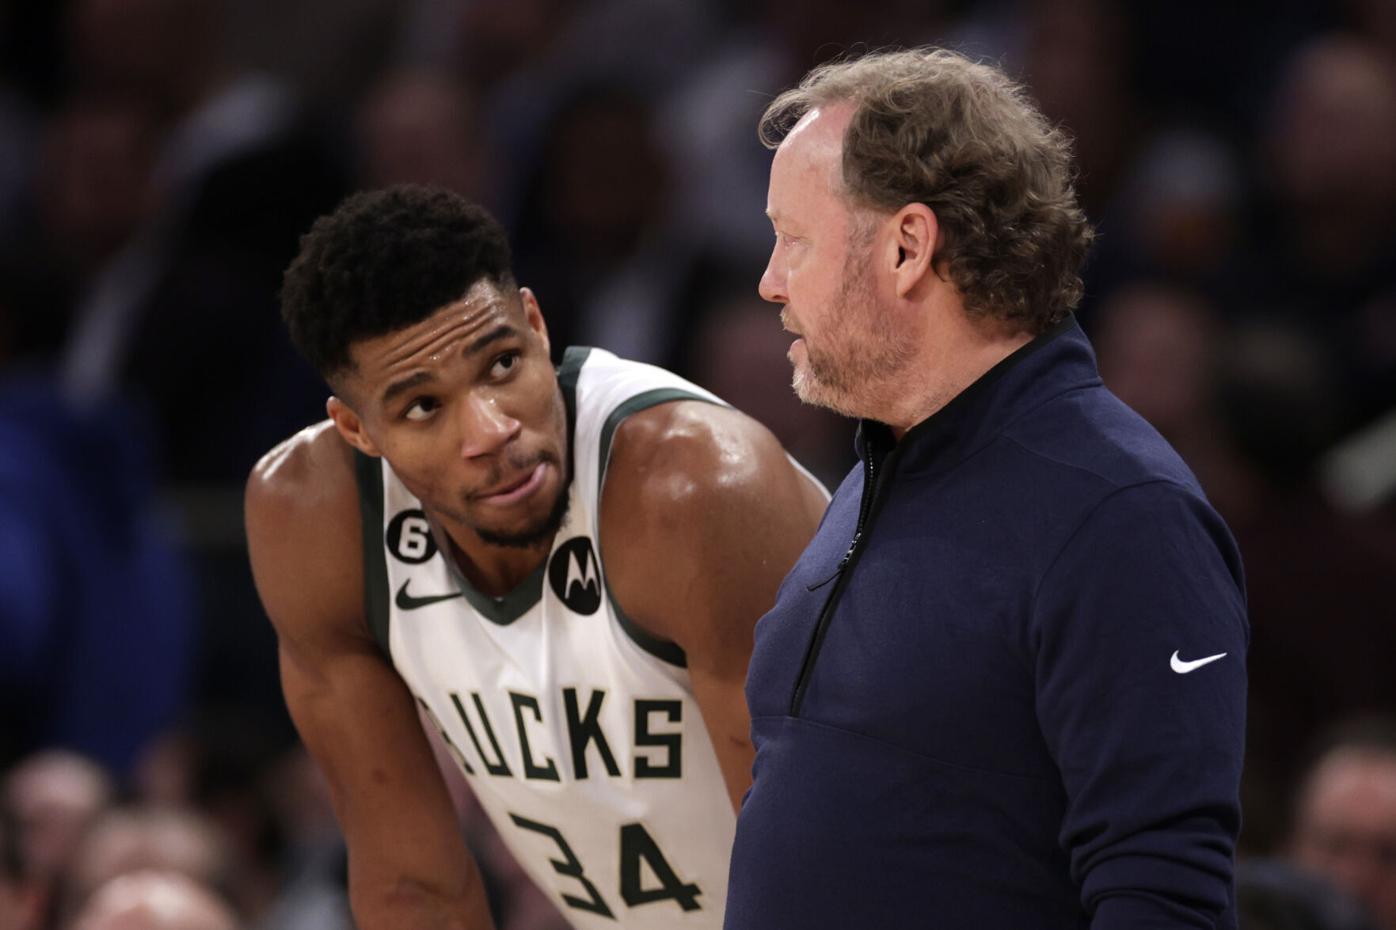 The Bucks had the most humiliating first round exit in NBA